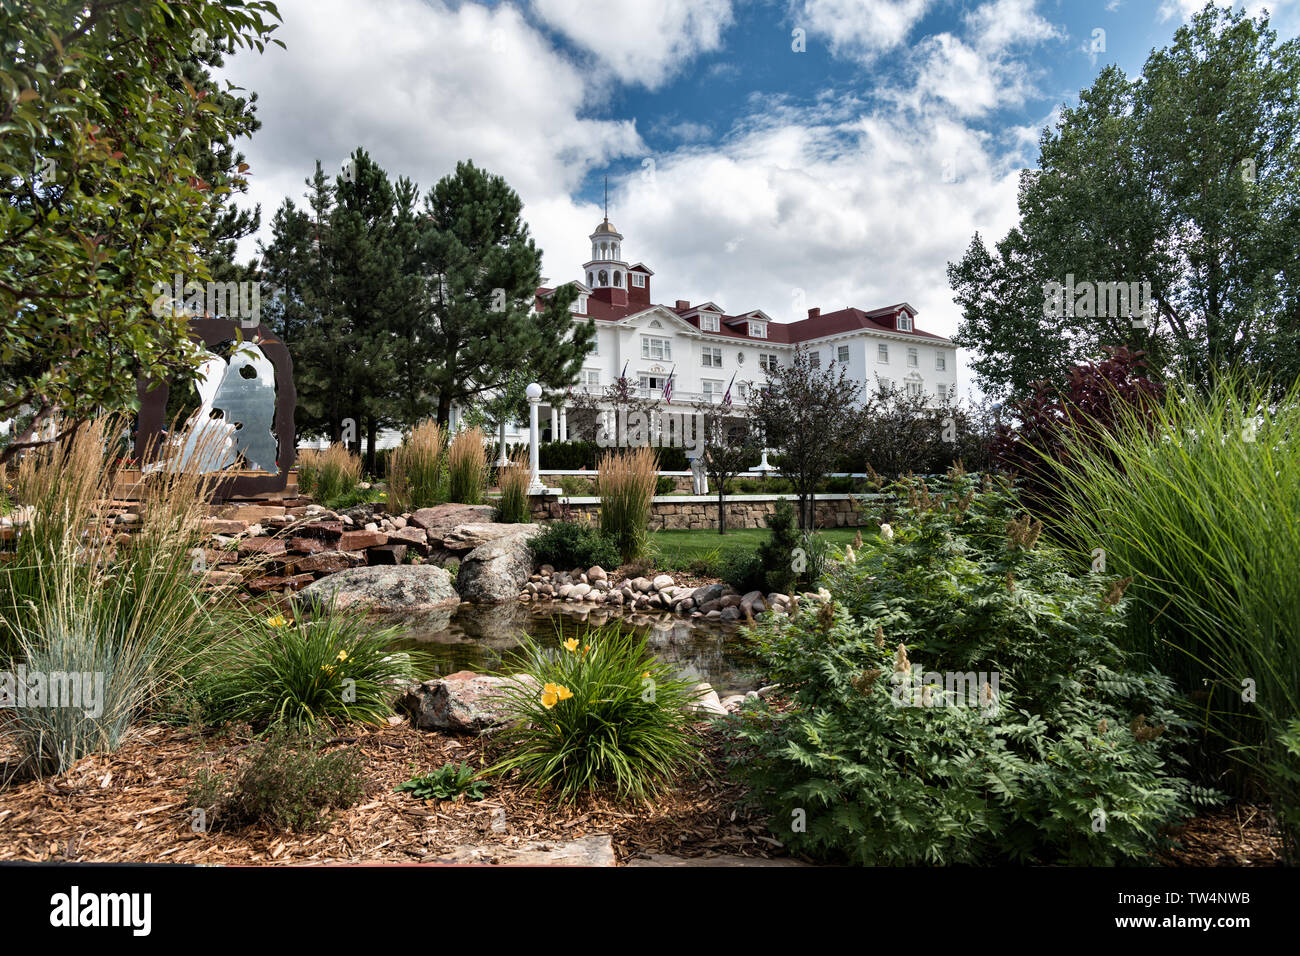 https://c8.alamy.com/comp/TW4NWB/the-historic-stanley-hotel-a-142-room-colonial-revival-hotel-built-in-1909-near-the-entrance-to-rocky-mountain-national-park-in-estes-park-colorado-the-hotel-served-as-the-inspiration-for-the-overlook-hotel-in-the-stephen-king-bestselling-novel-the-shining-TW4NWB.jpg